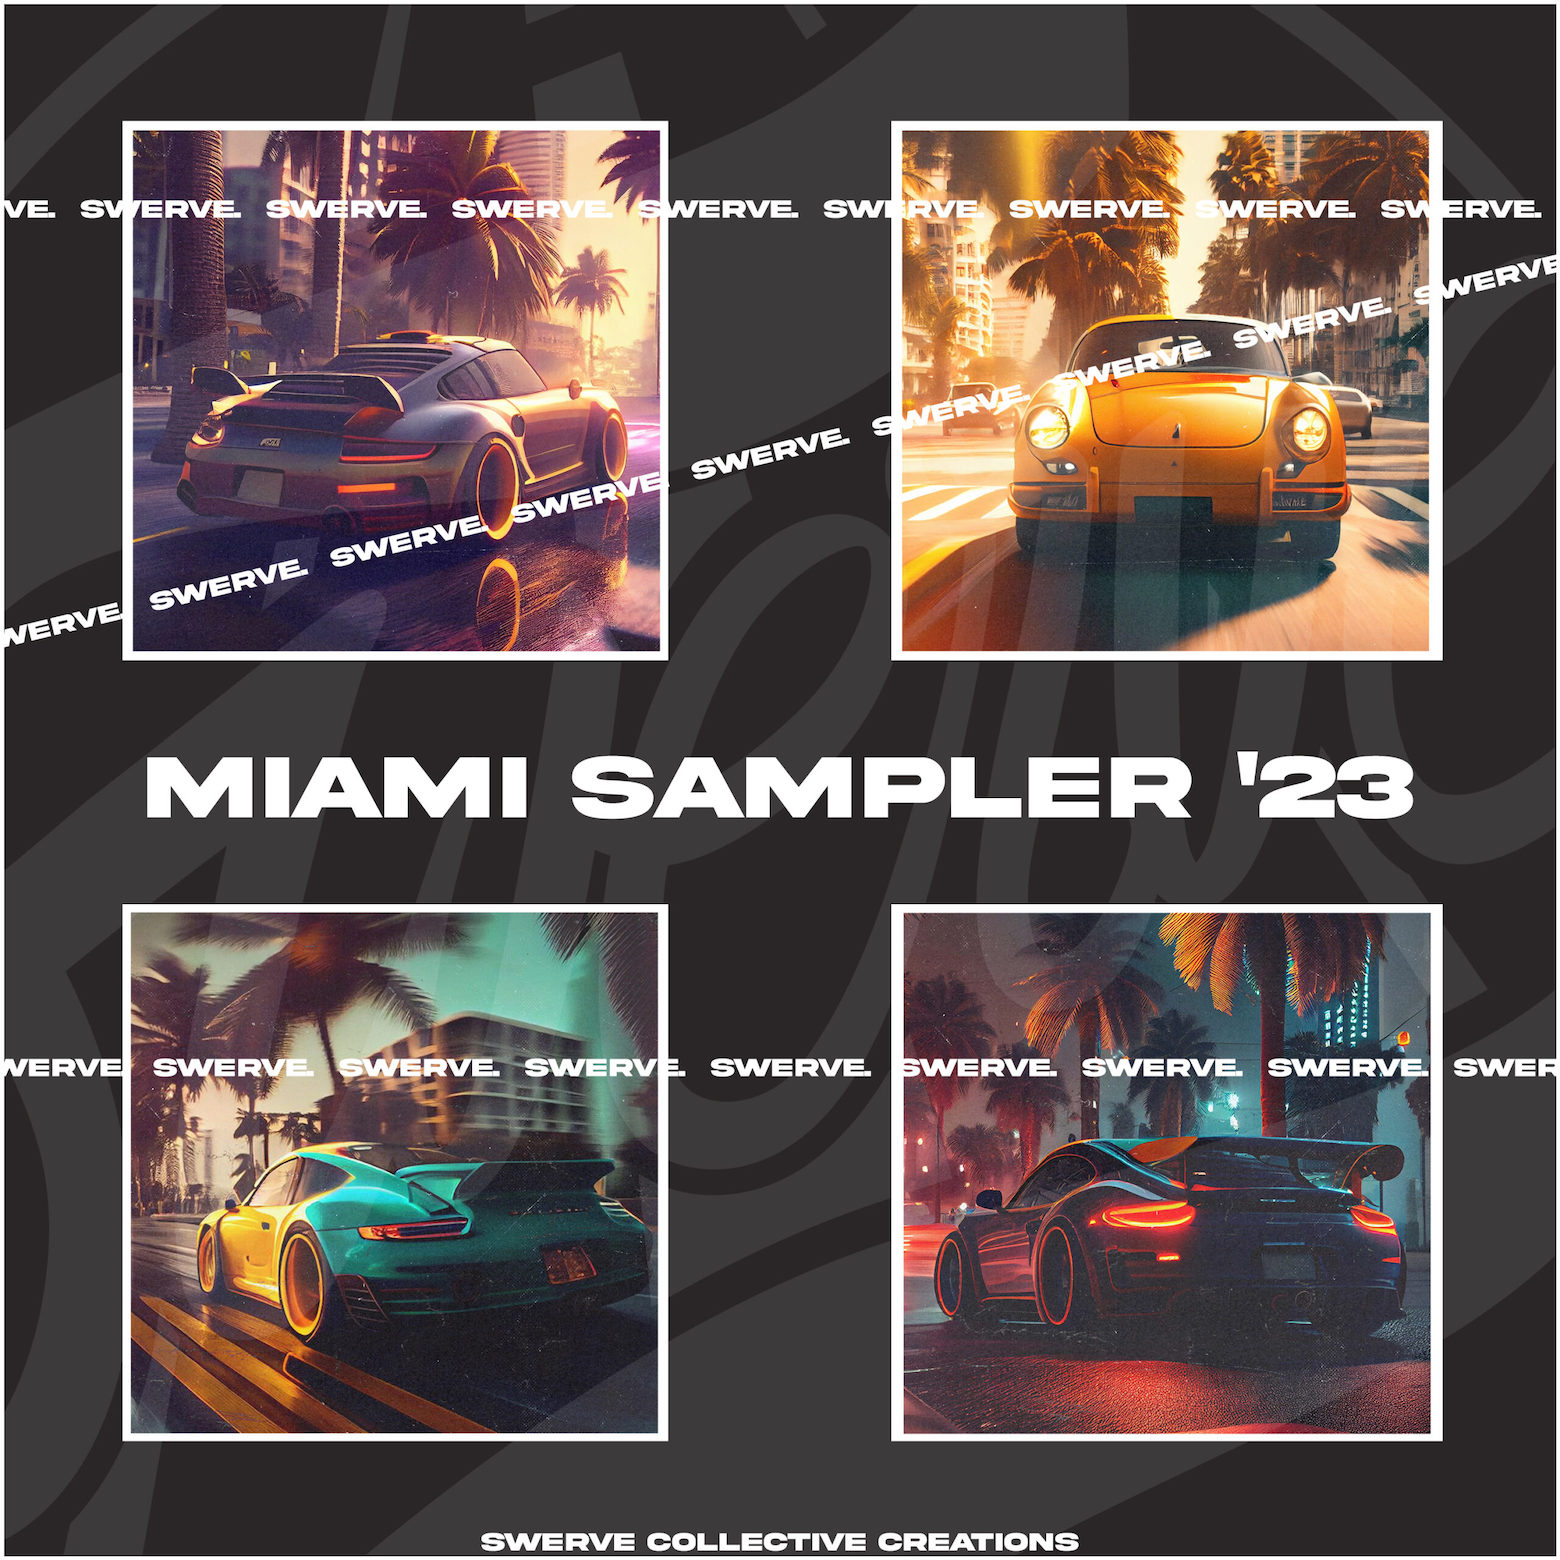 Swerve Collective Creations Drops Impressive 4-Track ‘Swerve Miami Sampler ‘23’ EP + Interview